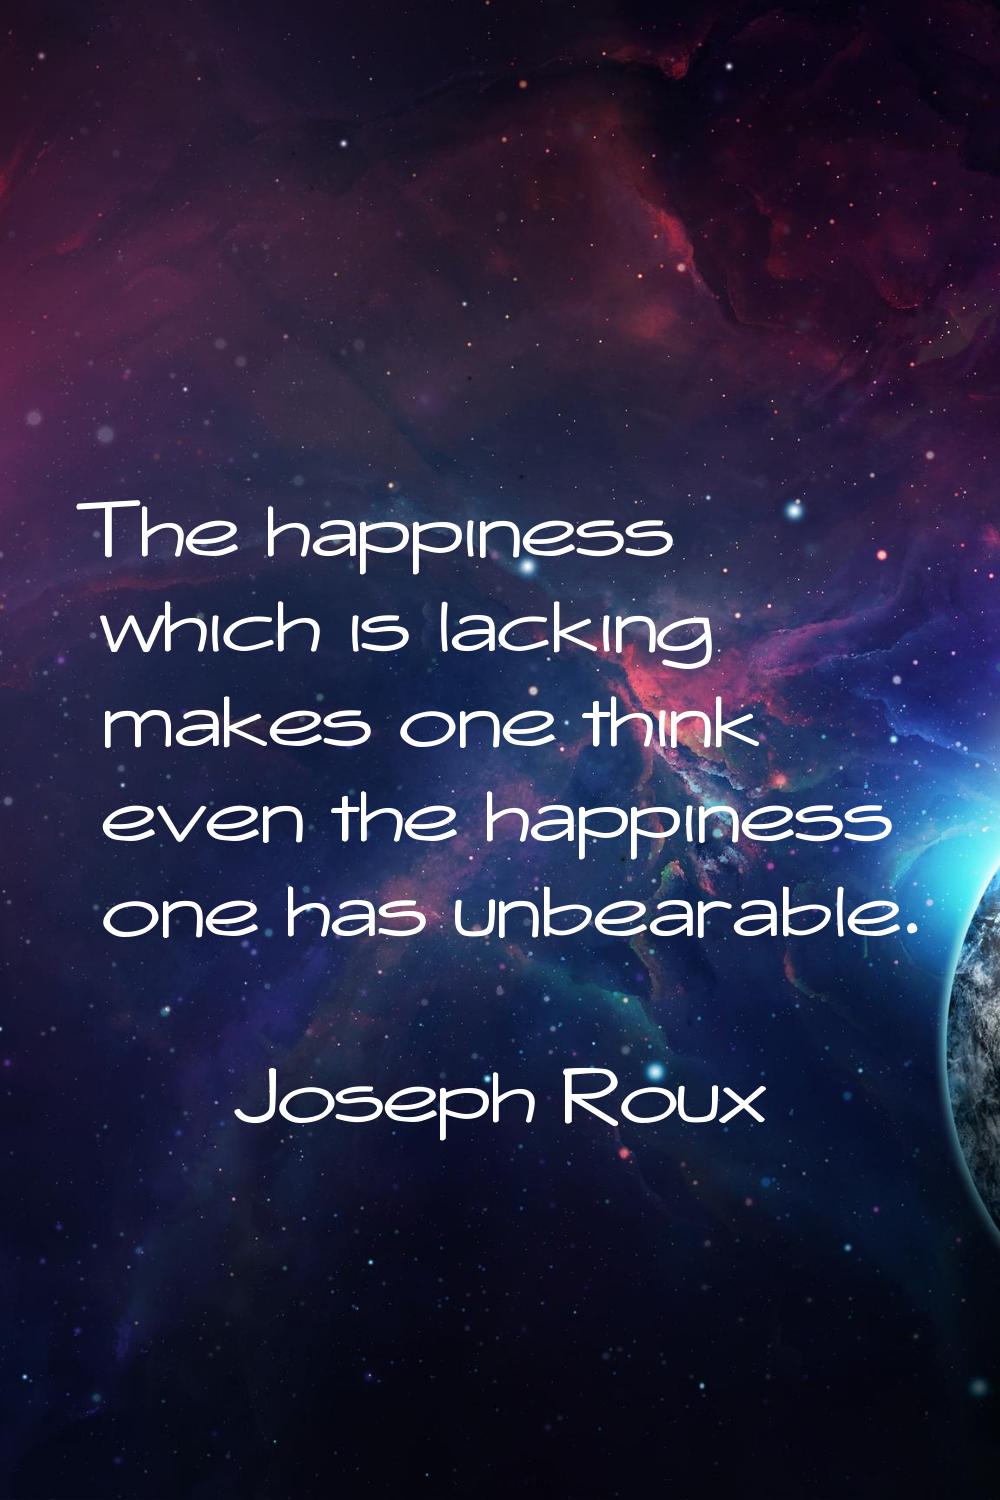 The happiness which is lacking makes one think even the happiness one has unbearable.